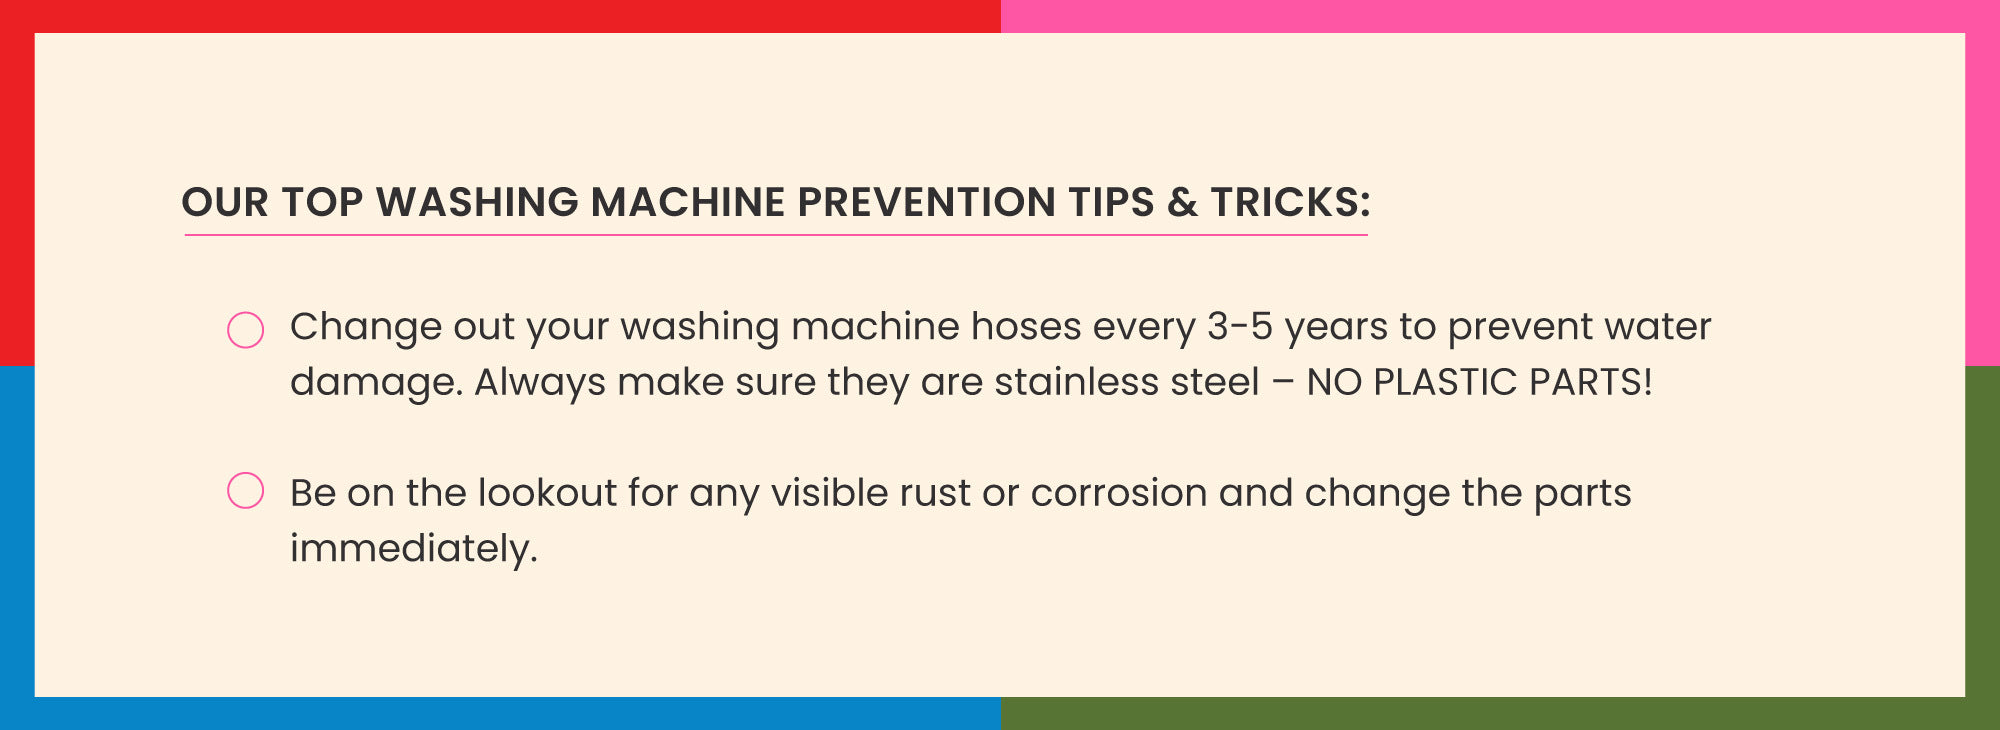 Top Prevention Tips